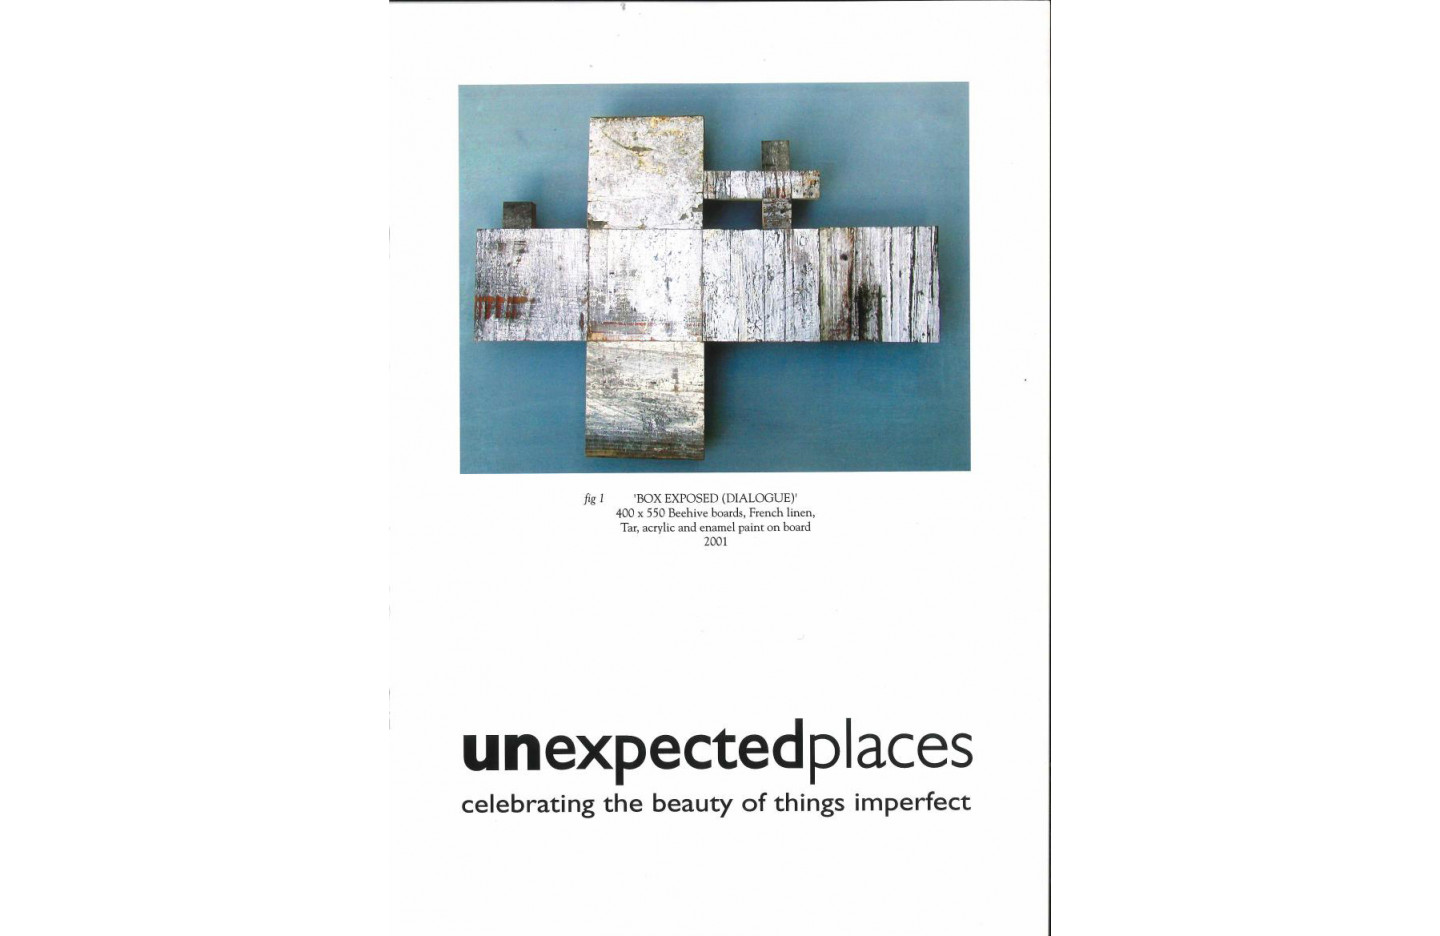 Paintings - unexpected places, Ramp Gallery (2001)